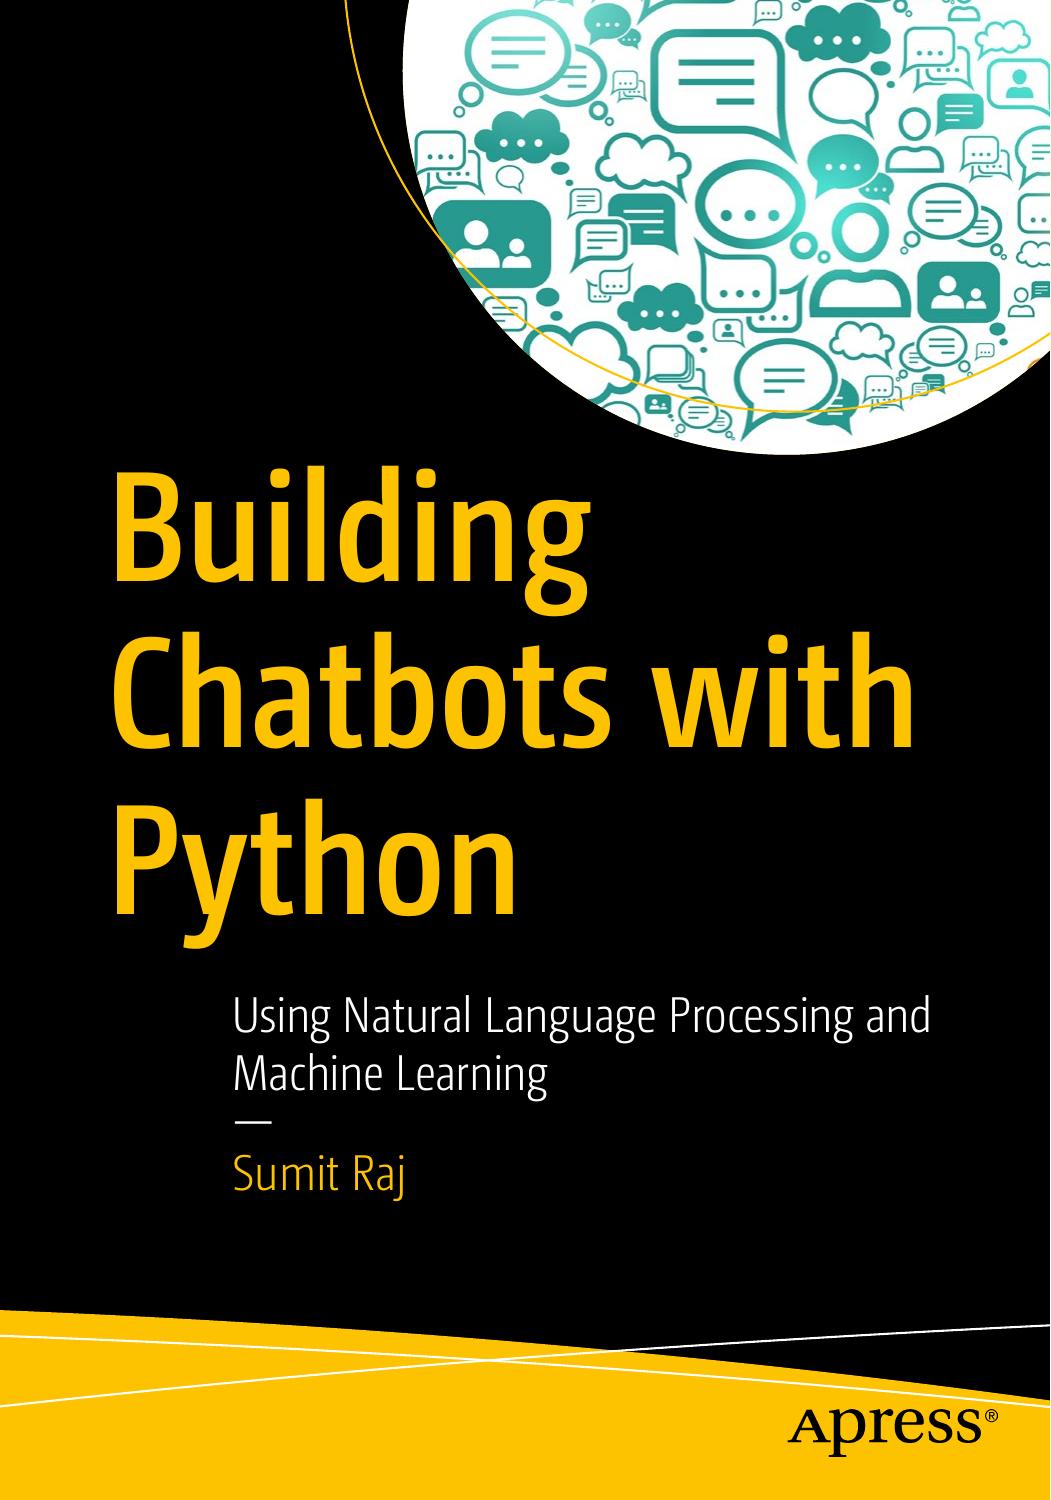 Building Chatbots with Python  Using Natural Language Processing and Machine Learning ( PDFDrive.com )